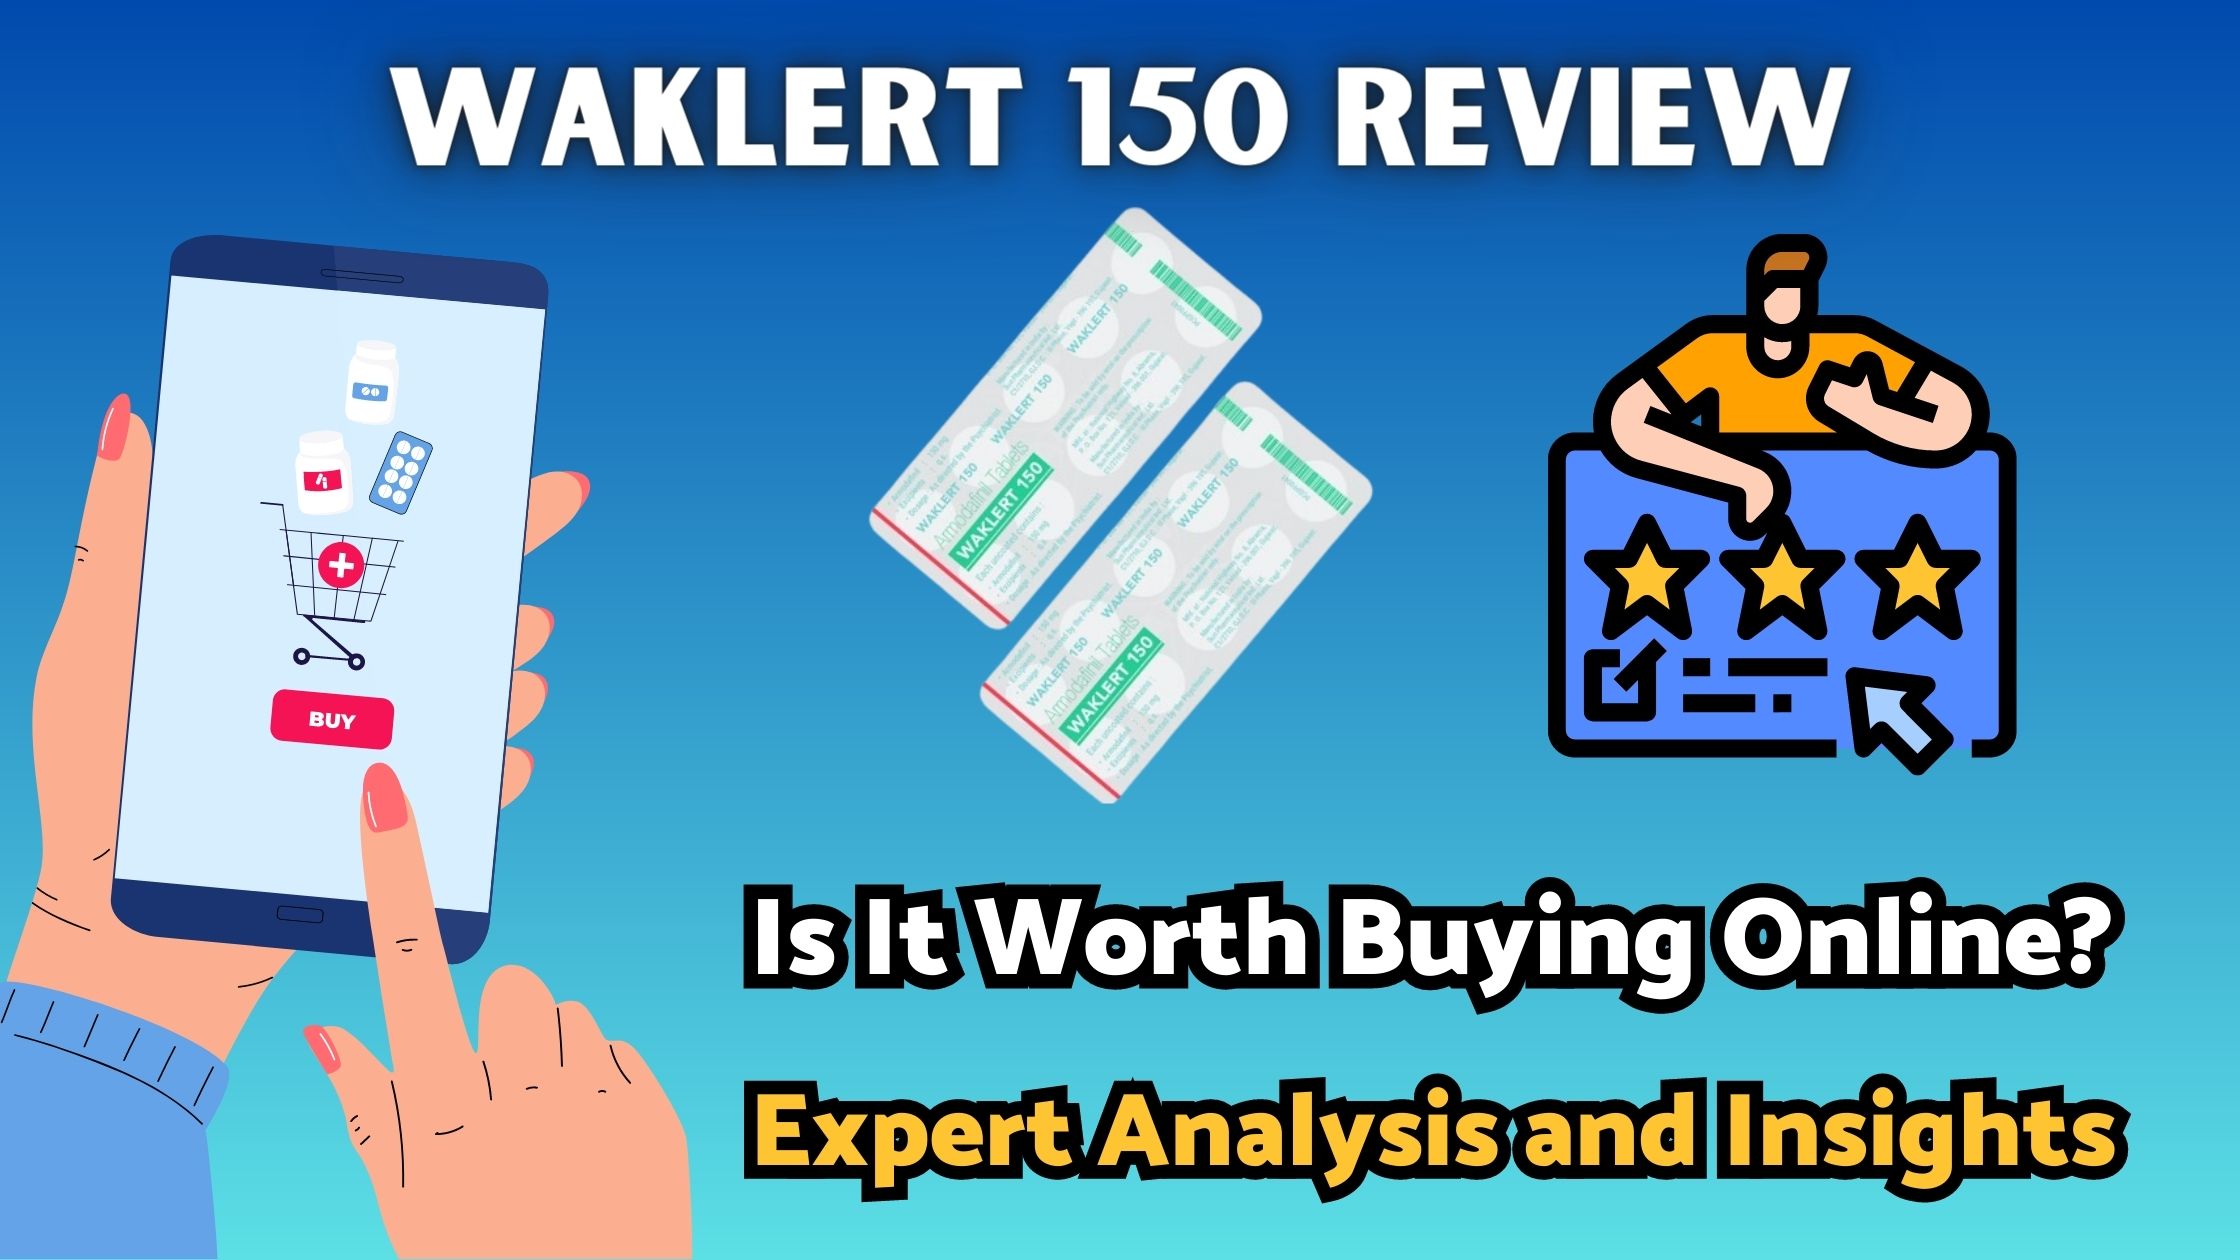 Waklert 150 Review: Is It Worth Buying Online? – Expert Analysis and Insights